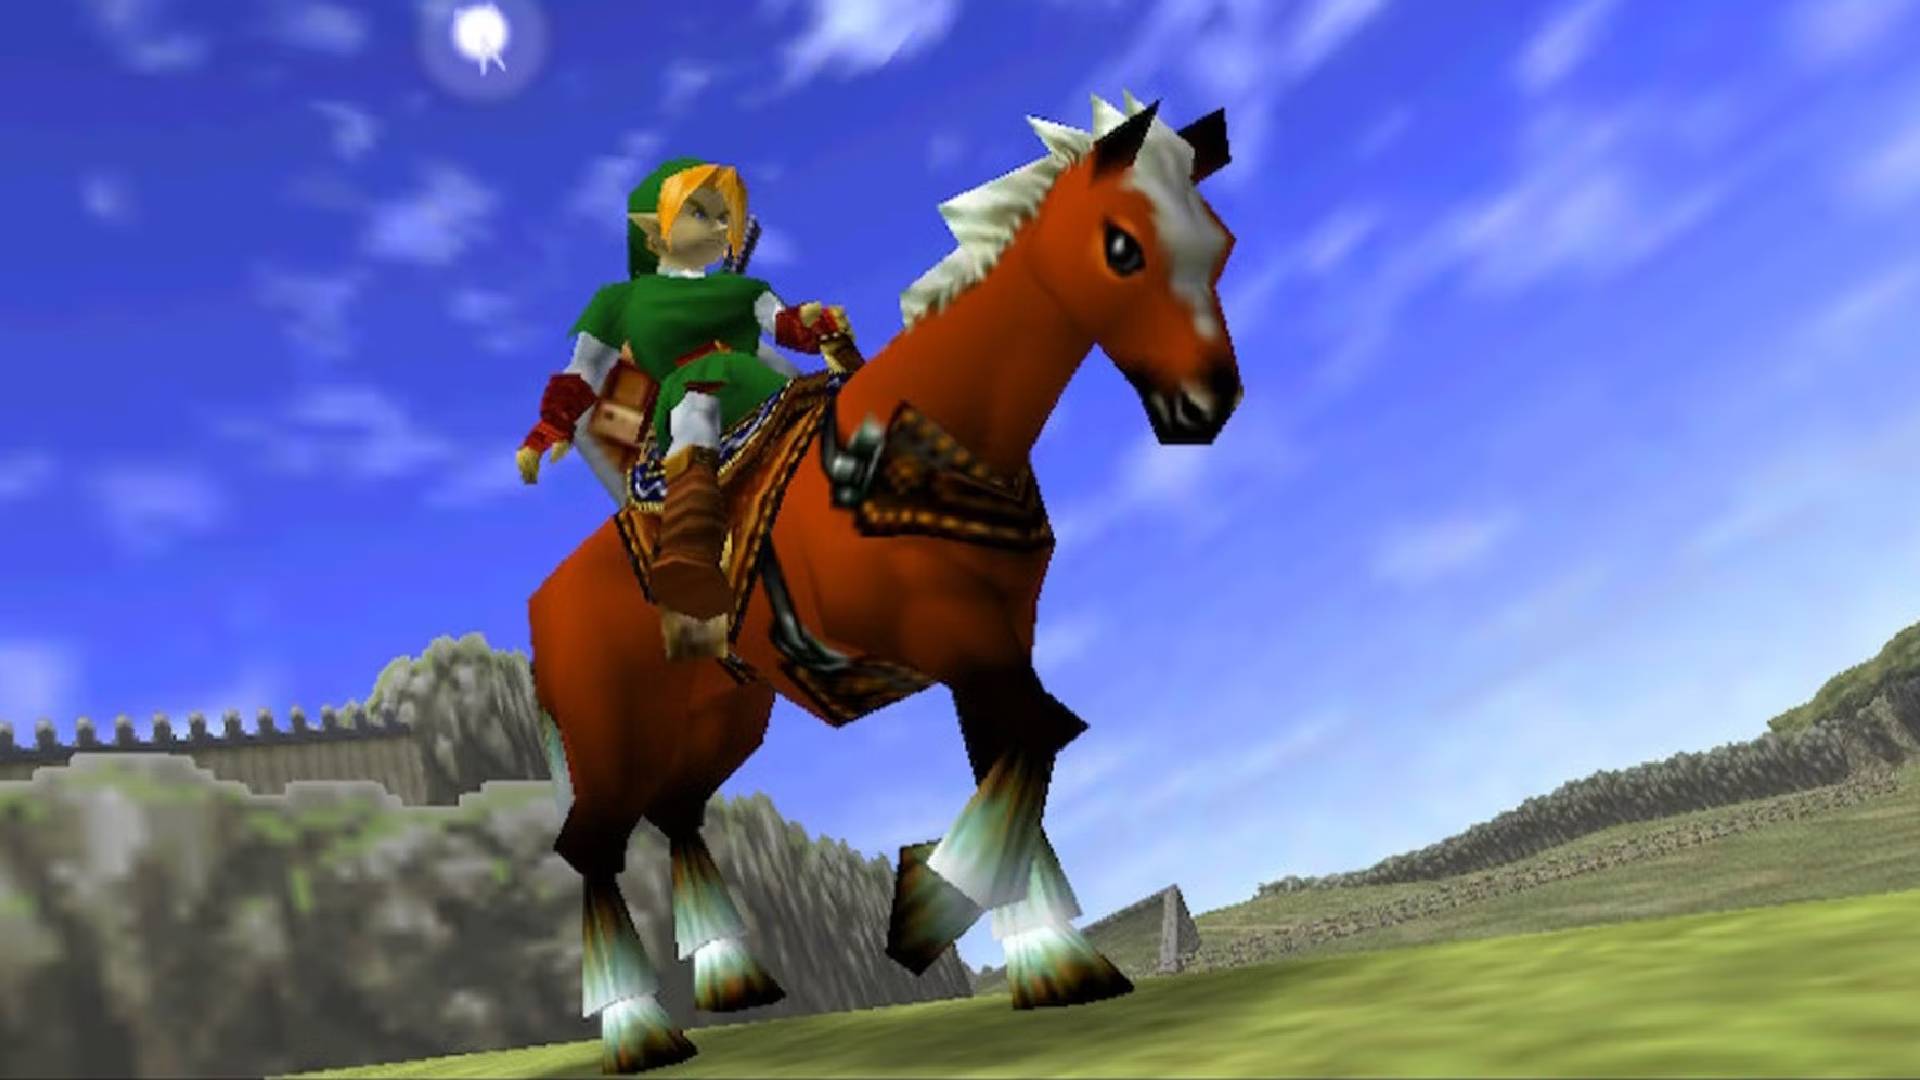 How Well Do You Remember The Songs From Ocarina Of Time?